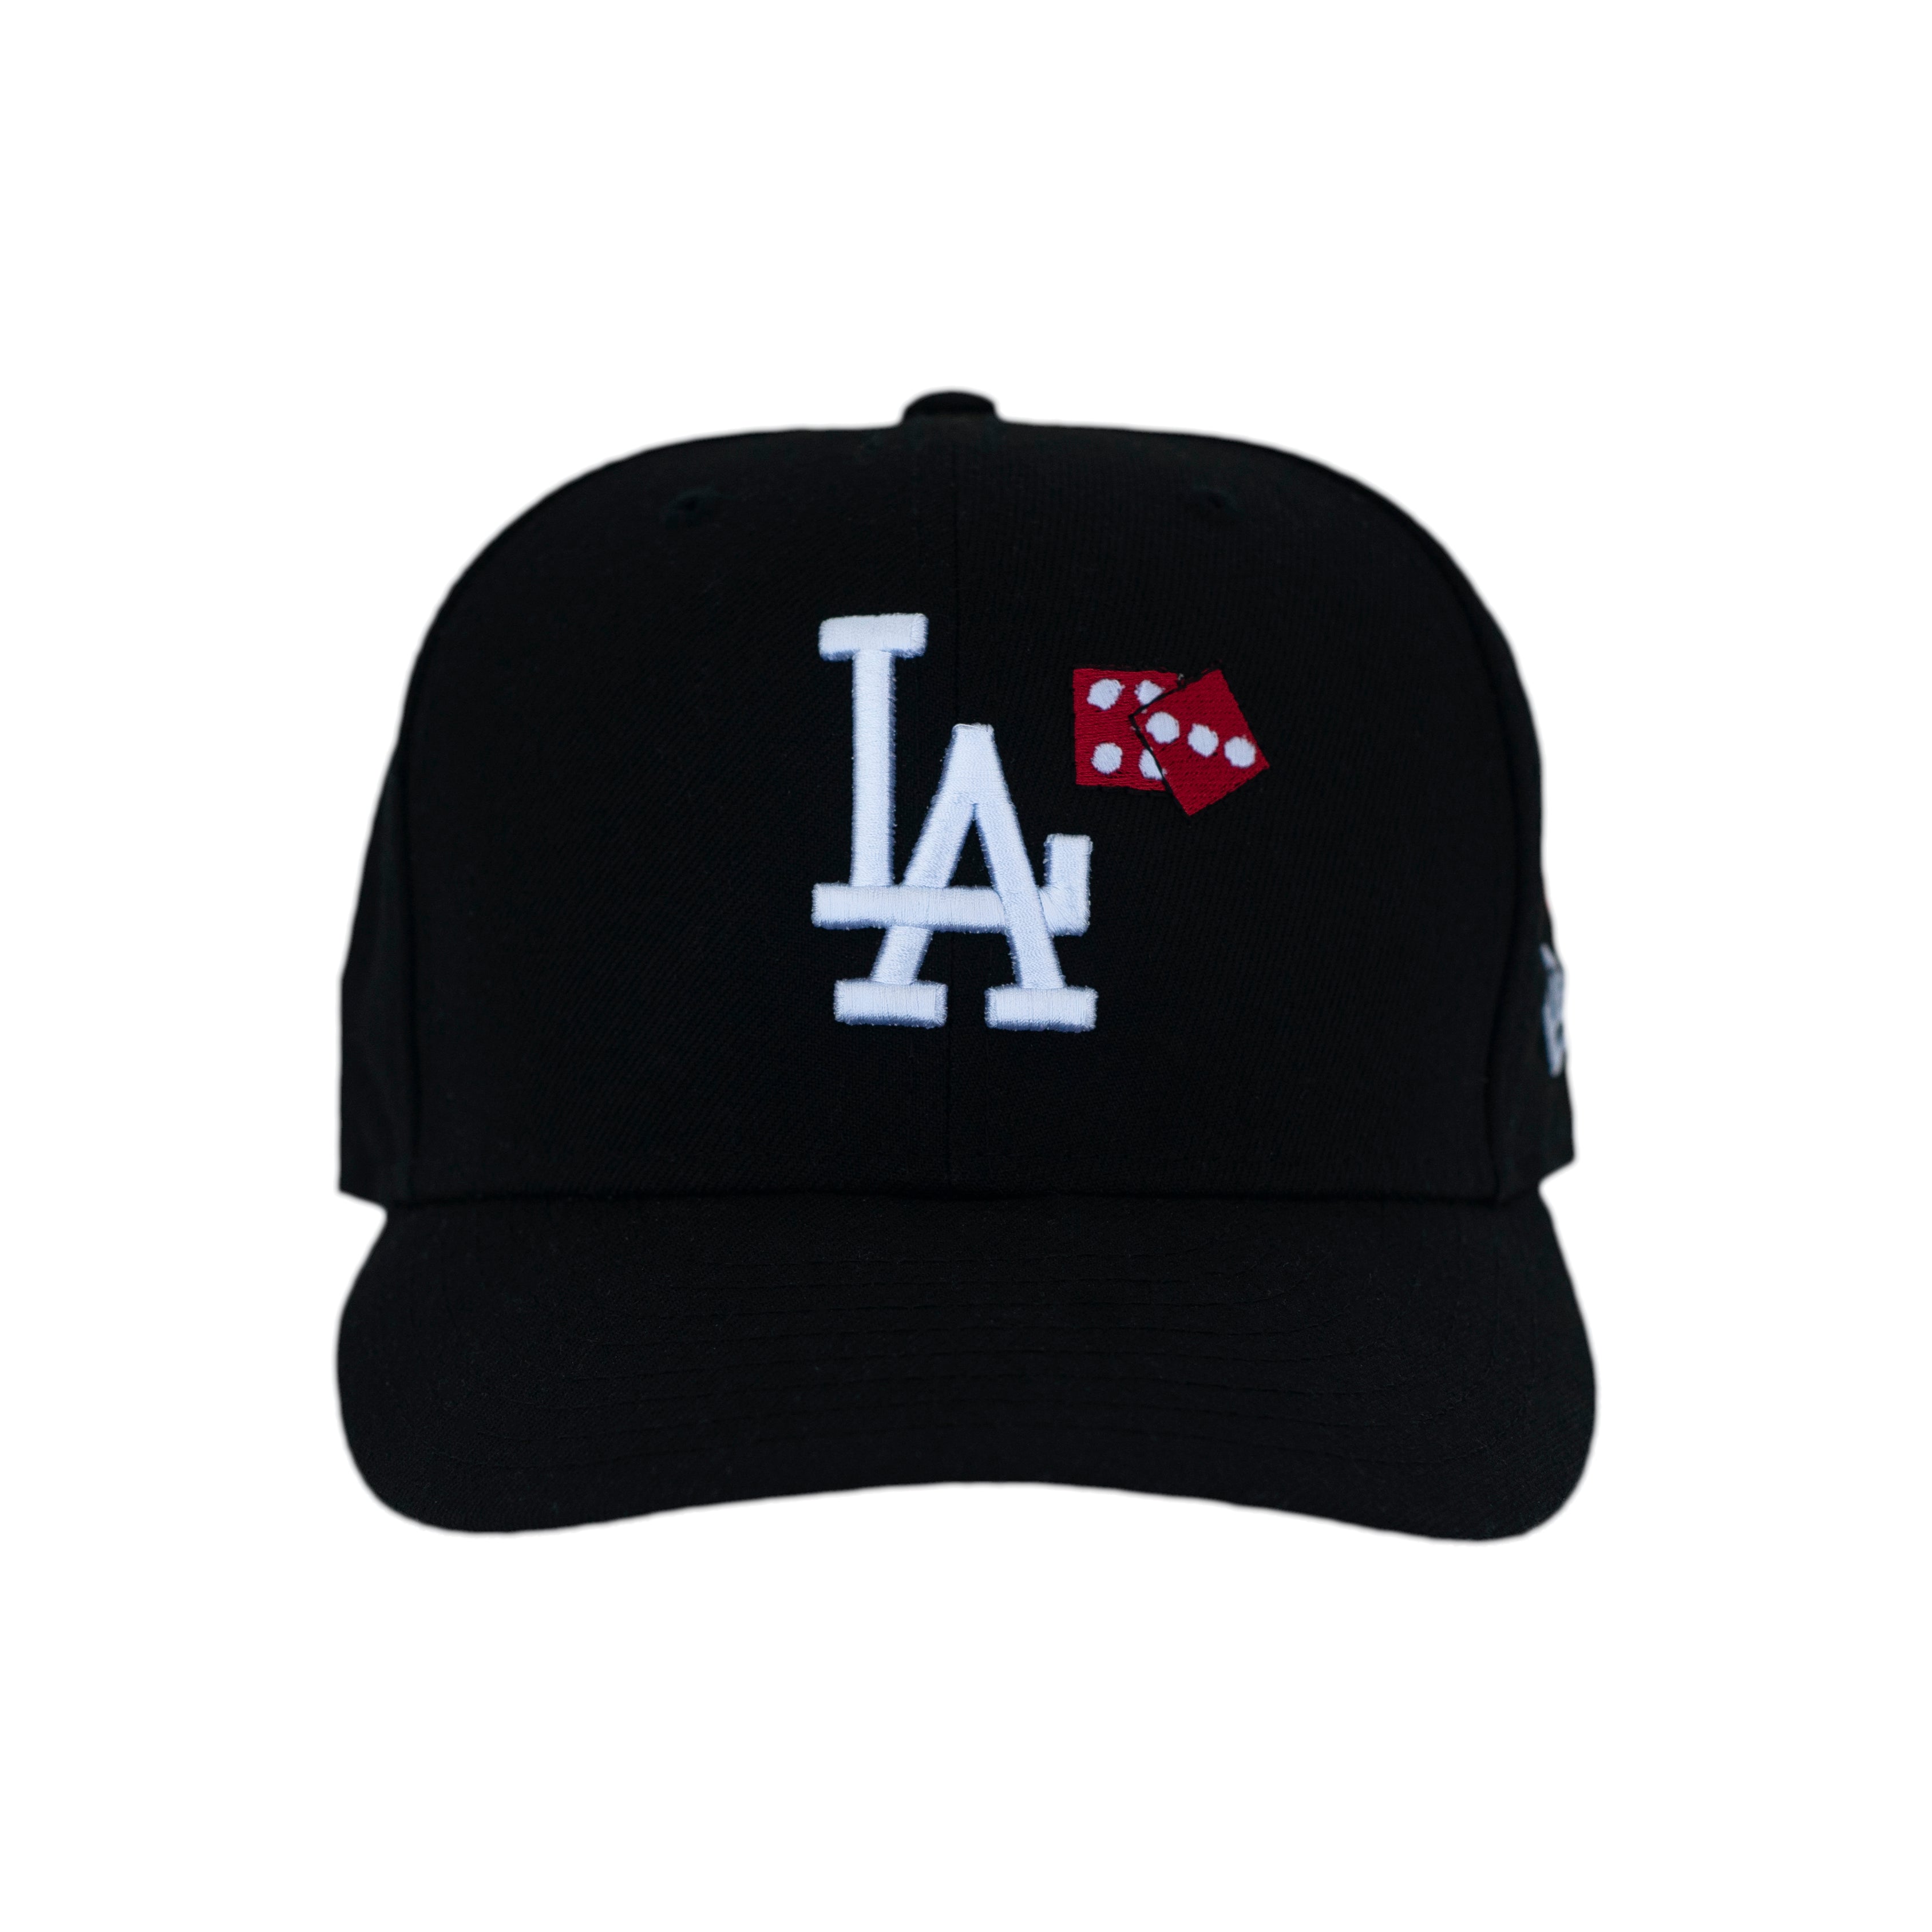 "Watch the ones you're rolling with" Limited Edition LA Fitted